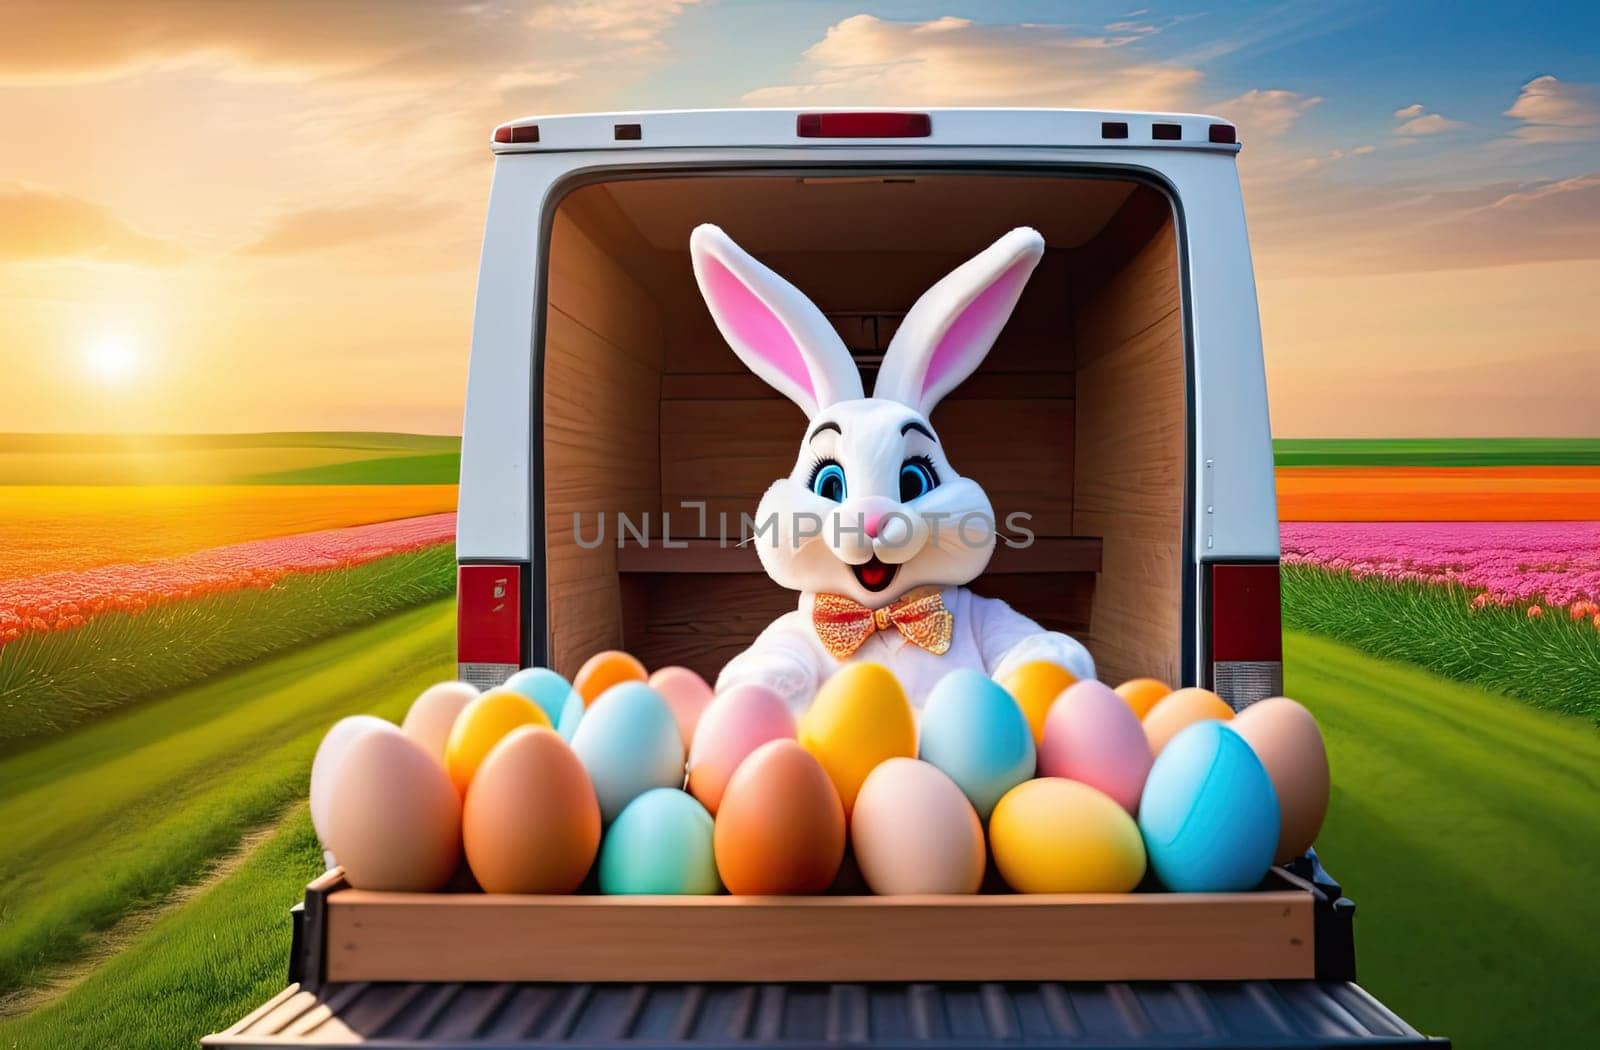 Easter concept. A white cartoon and cheerful bunny sits in a car truck with Easter colorful eggs. Truck on the background of the road and green grass with flowers, sunset rays of the sun. Egg delivery. Close-up.